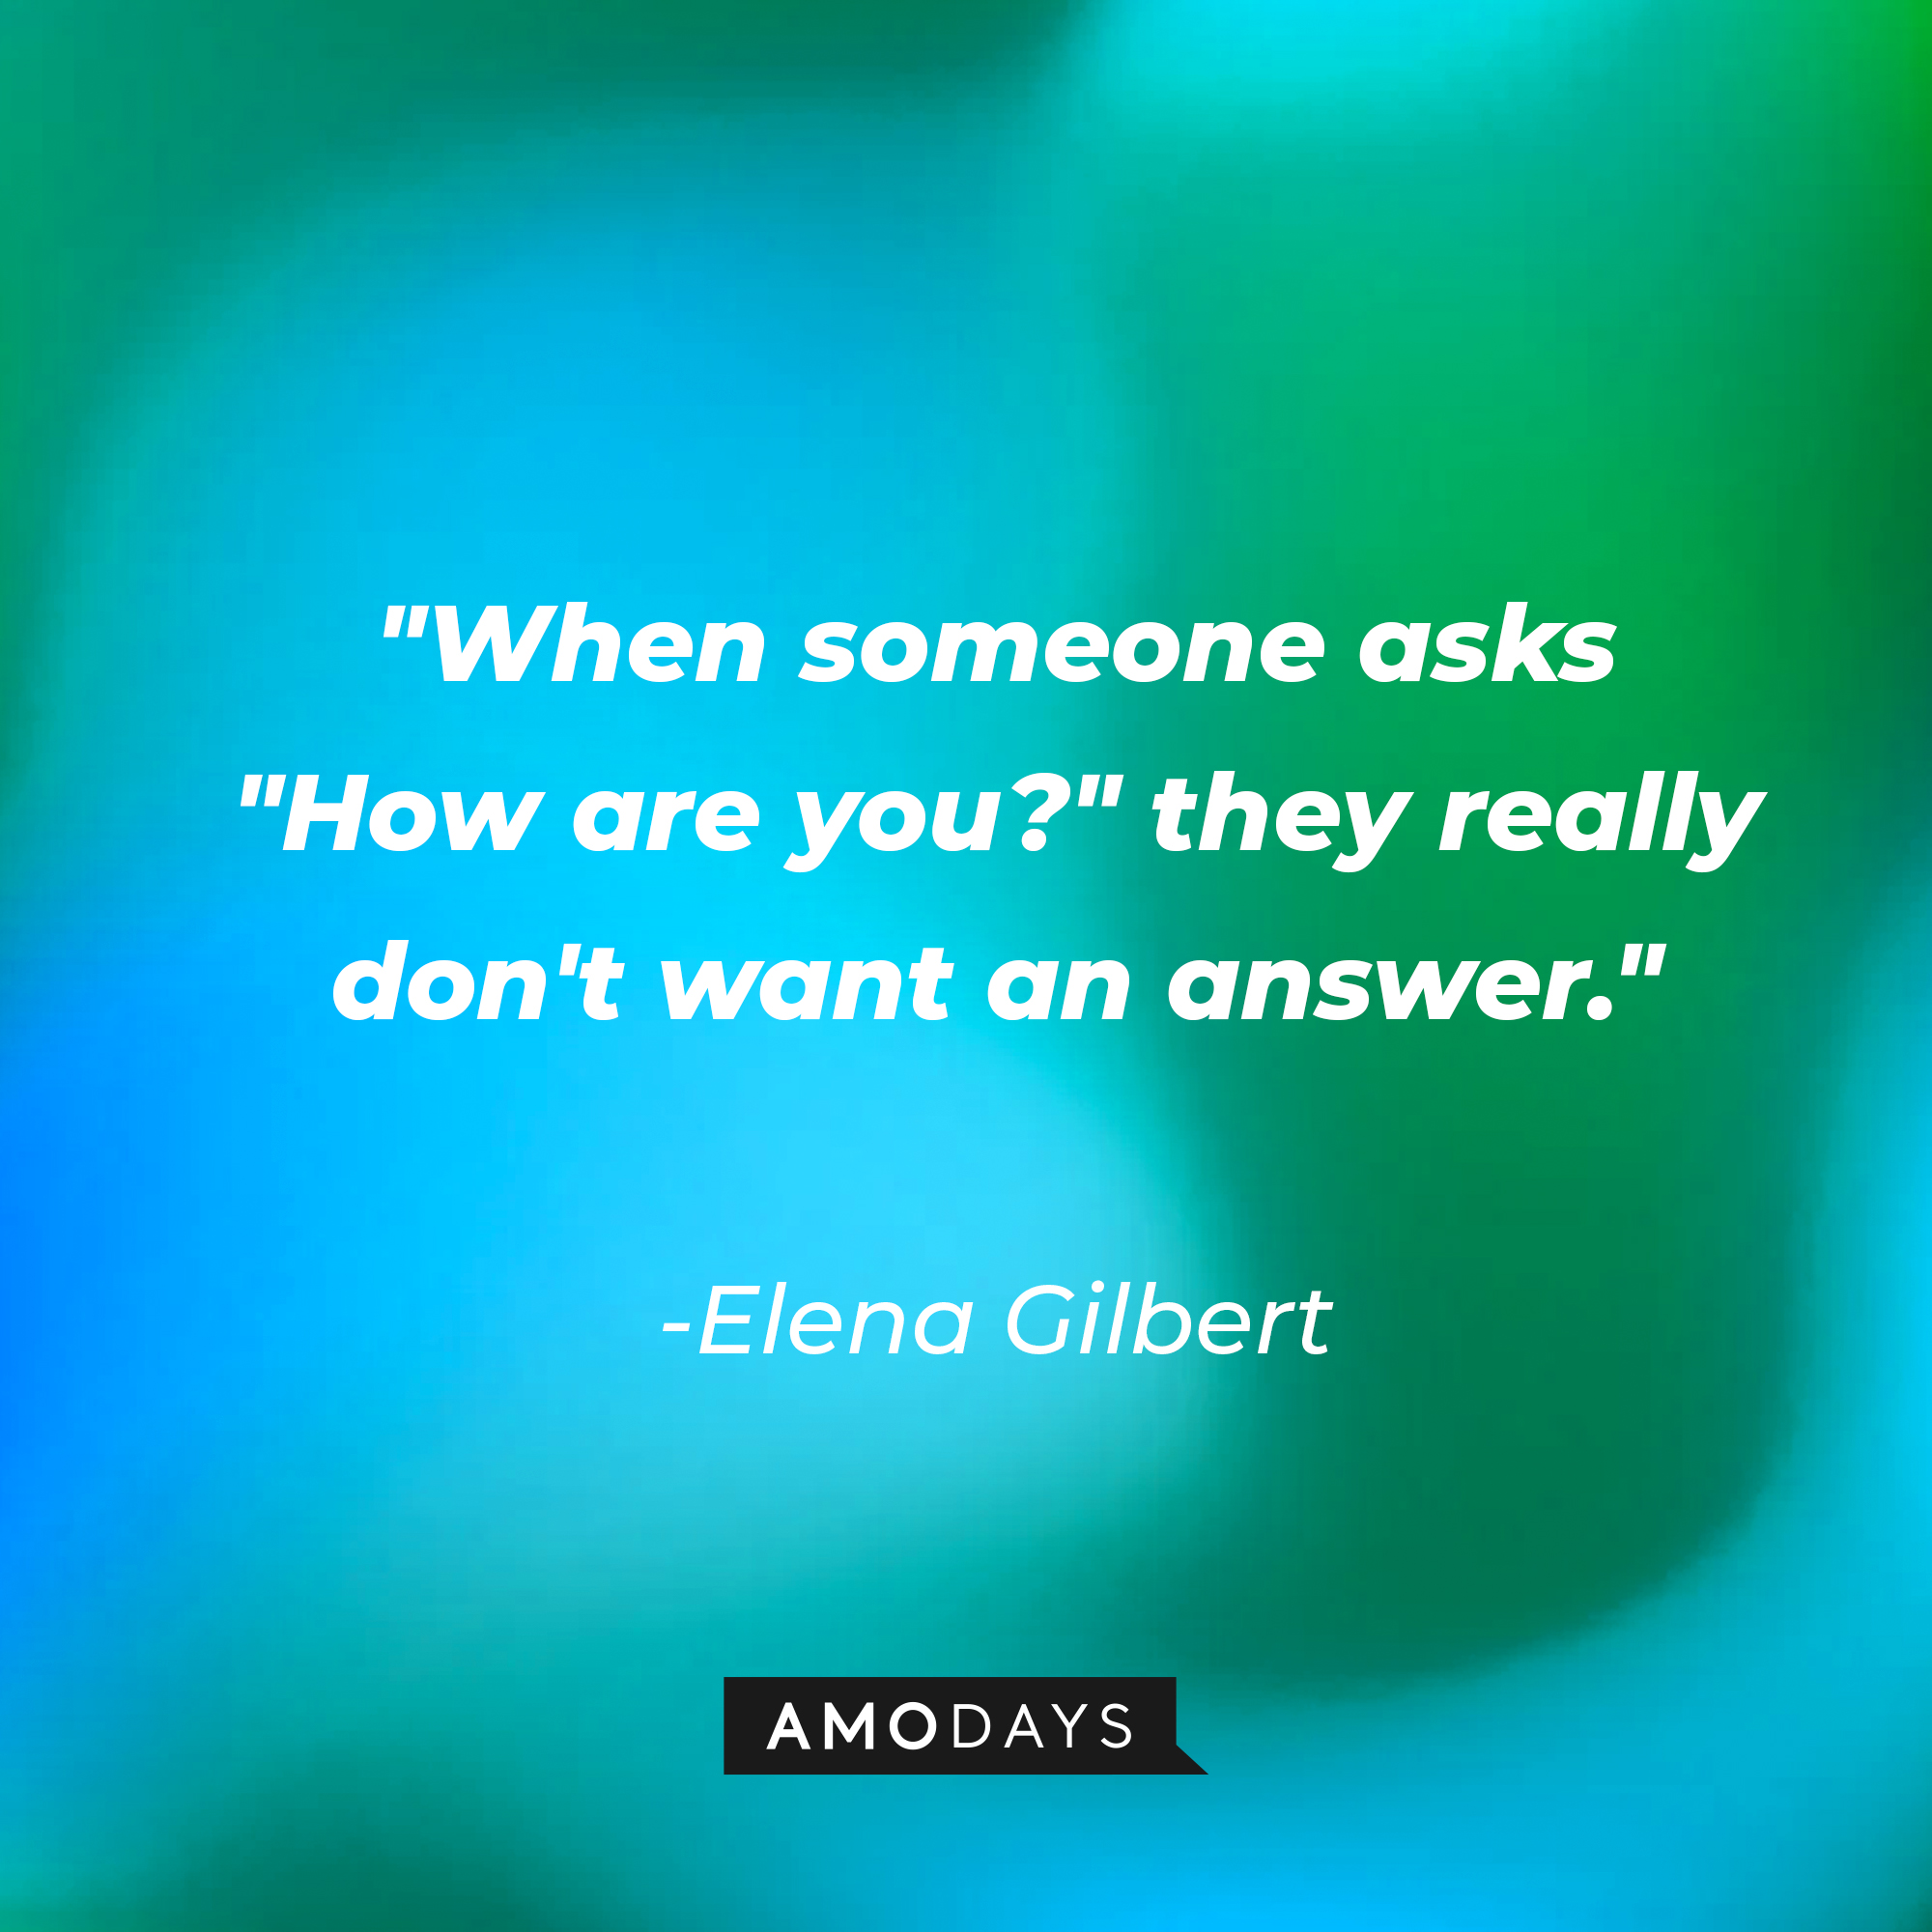 Elena Gilbert's quote: "When someone asks "How are you?" they really don't want an answer." | Image: AmoDays